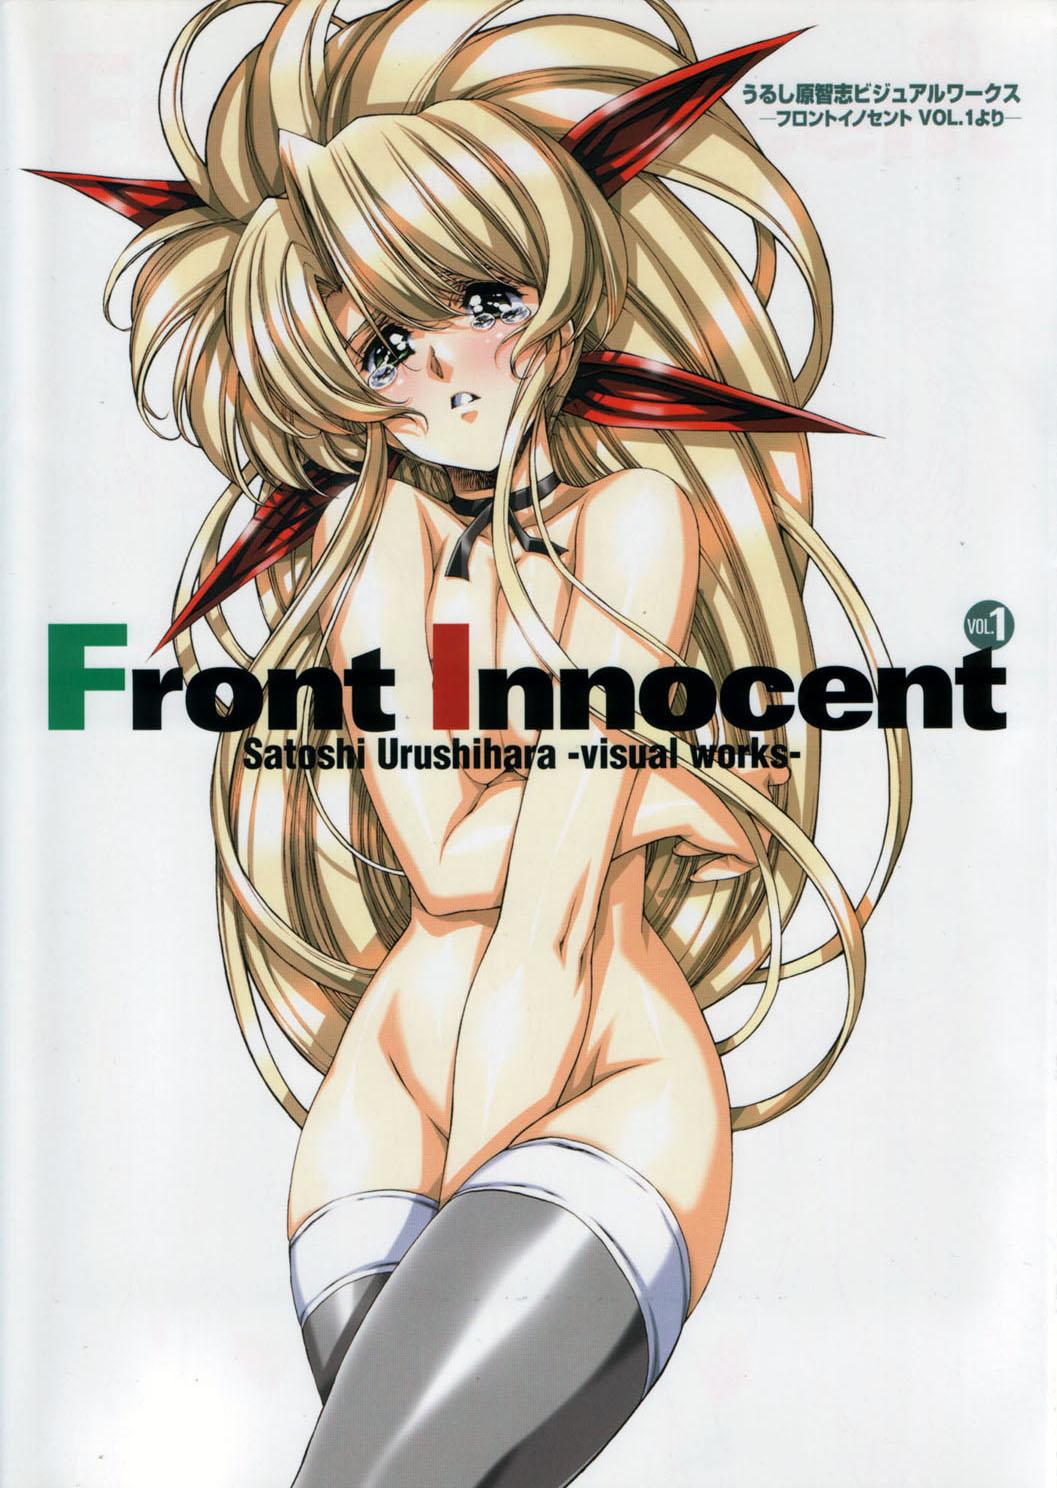 Naked Women Fucking Front Innocent #1: Satoshi Urushihara Visual Works - Another lady innocent Natural Tits - Page 2